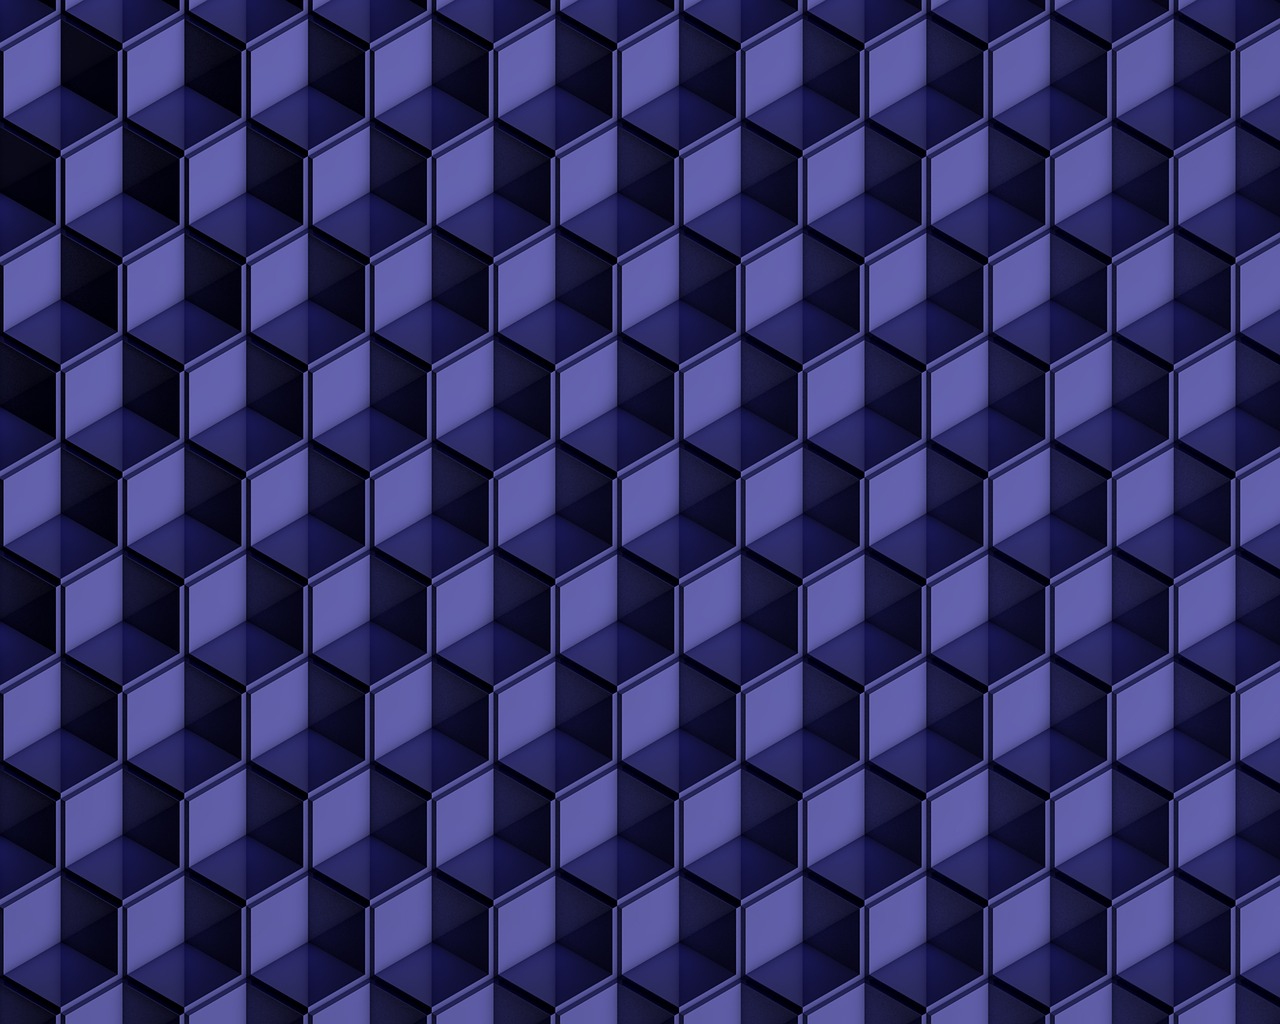 a pattern of blue cubes on a black background, shutterstock, abstract illusionism, mauve background, hexagonal wall, symmetry illustration, tileable